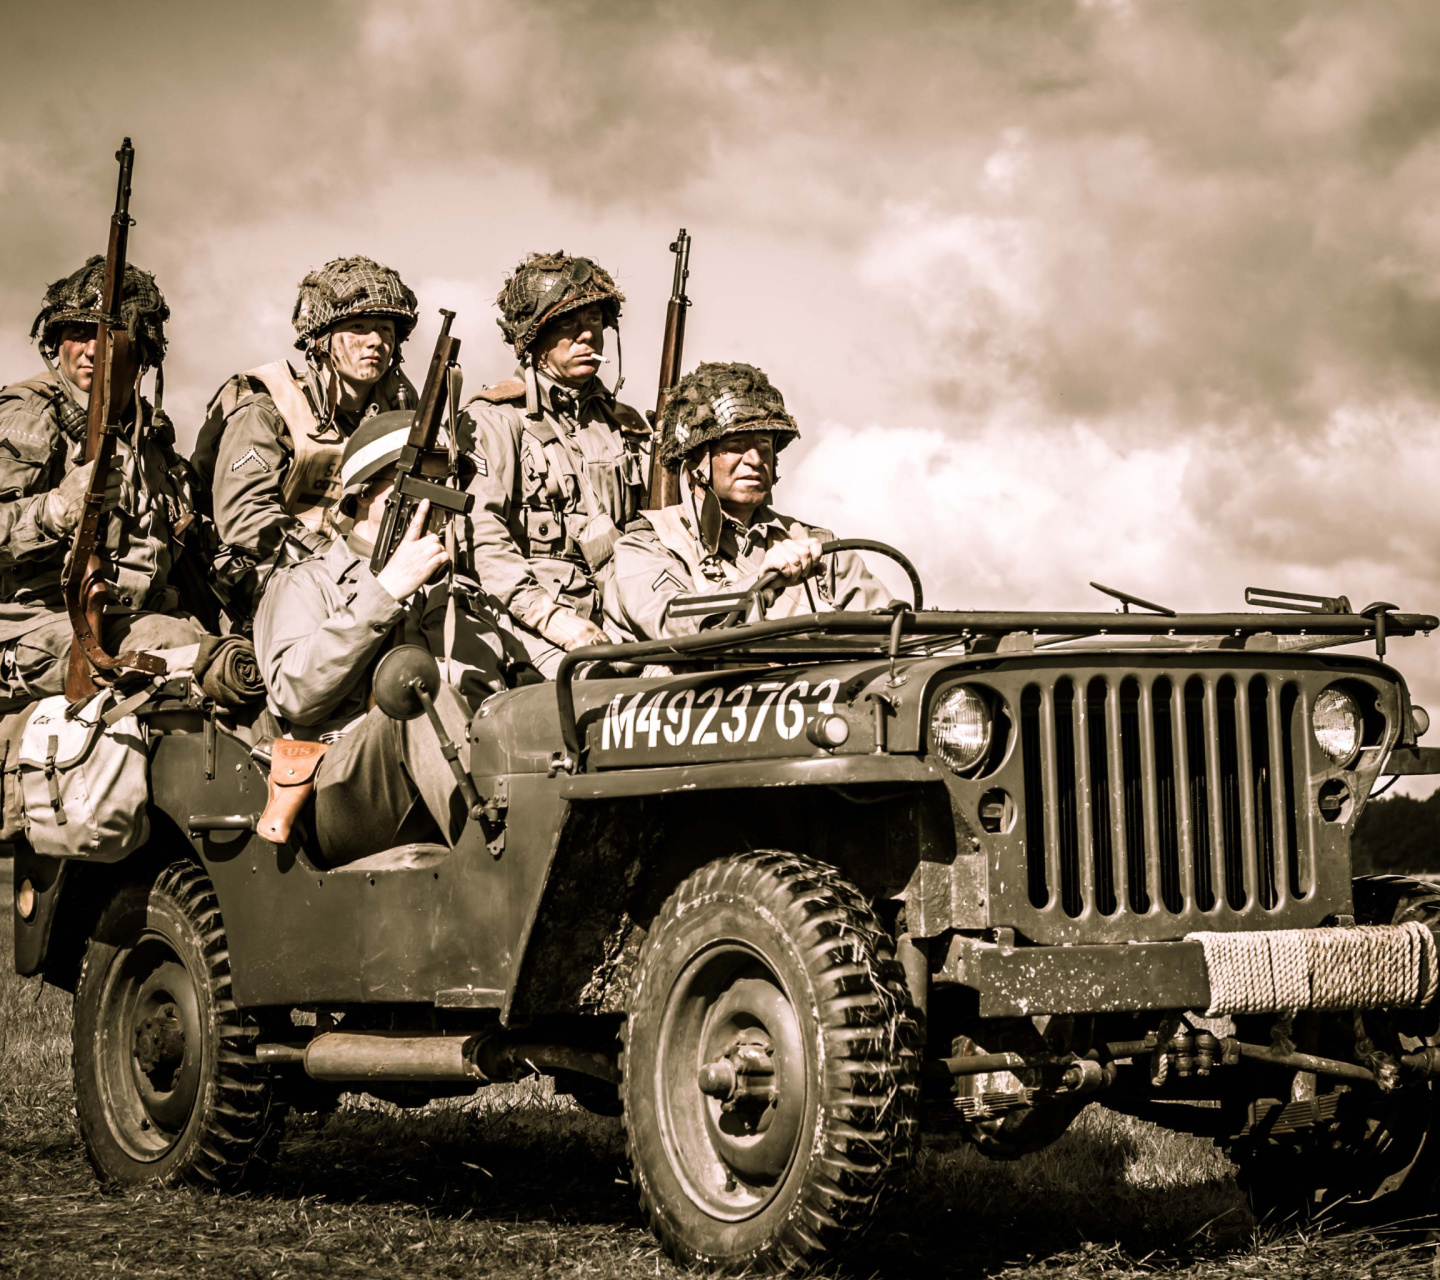 Soldiers on Jeep wallpaper 1440x1280